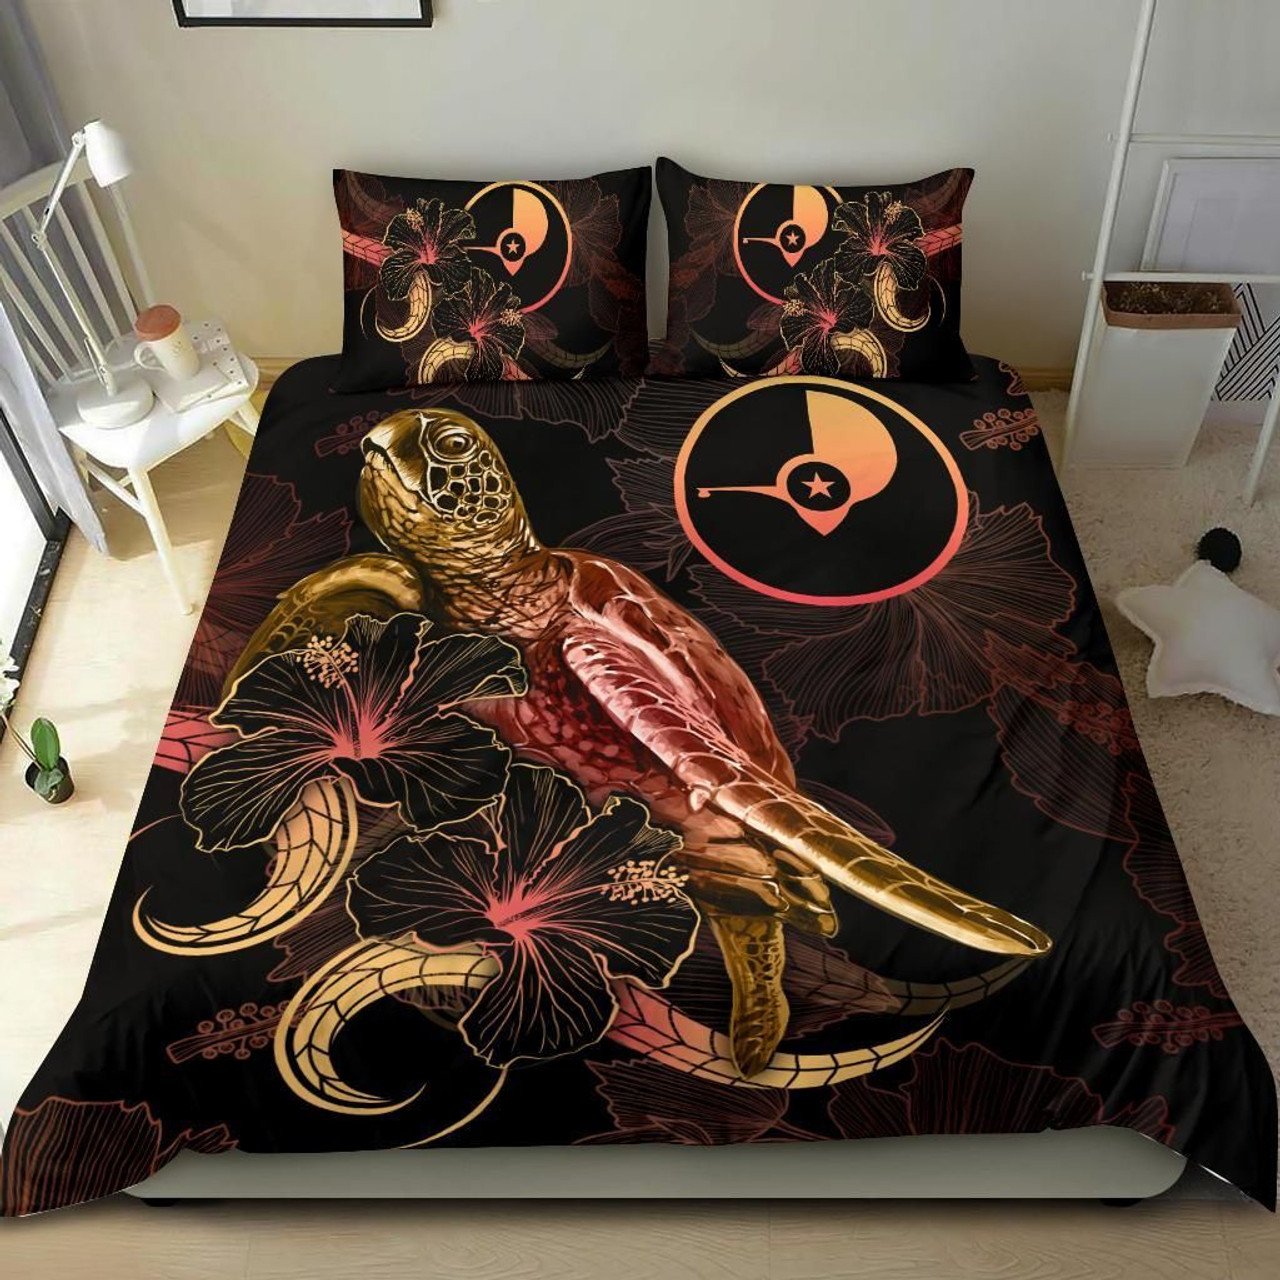 Yap Polynesian Bedding Set - Turtle With Blooming Hibiscus Gold 2